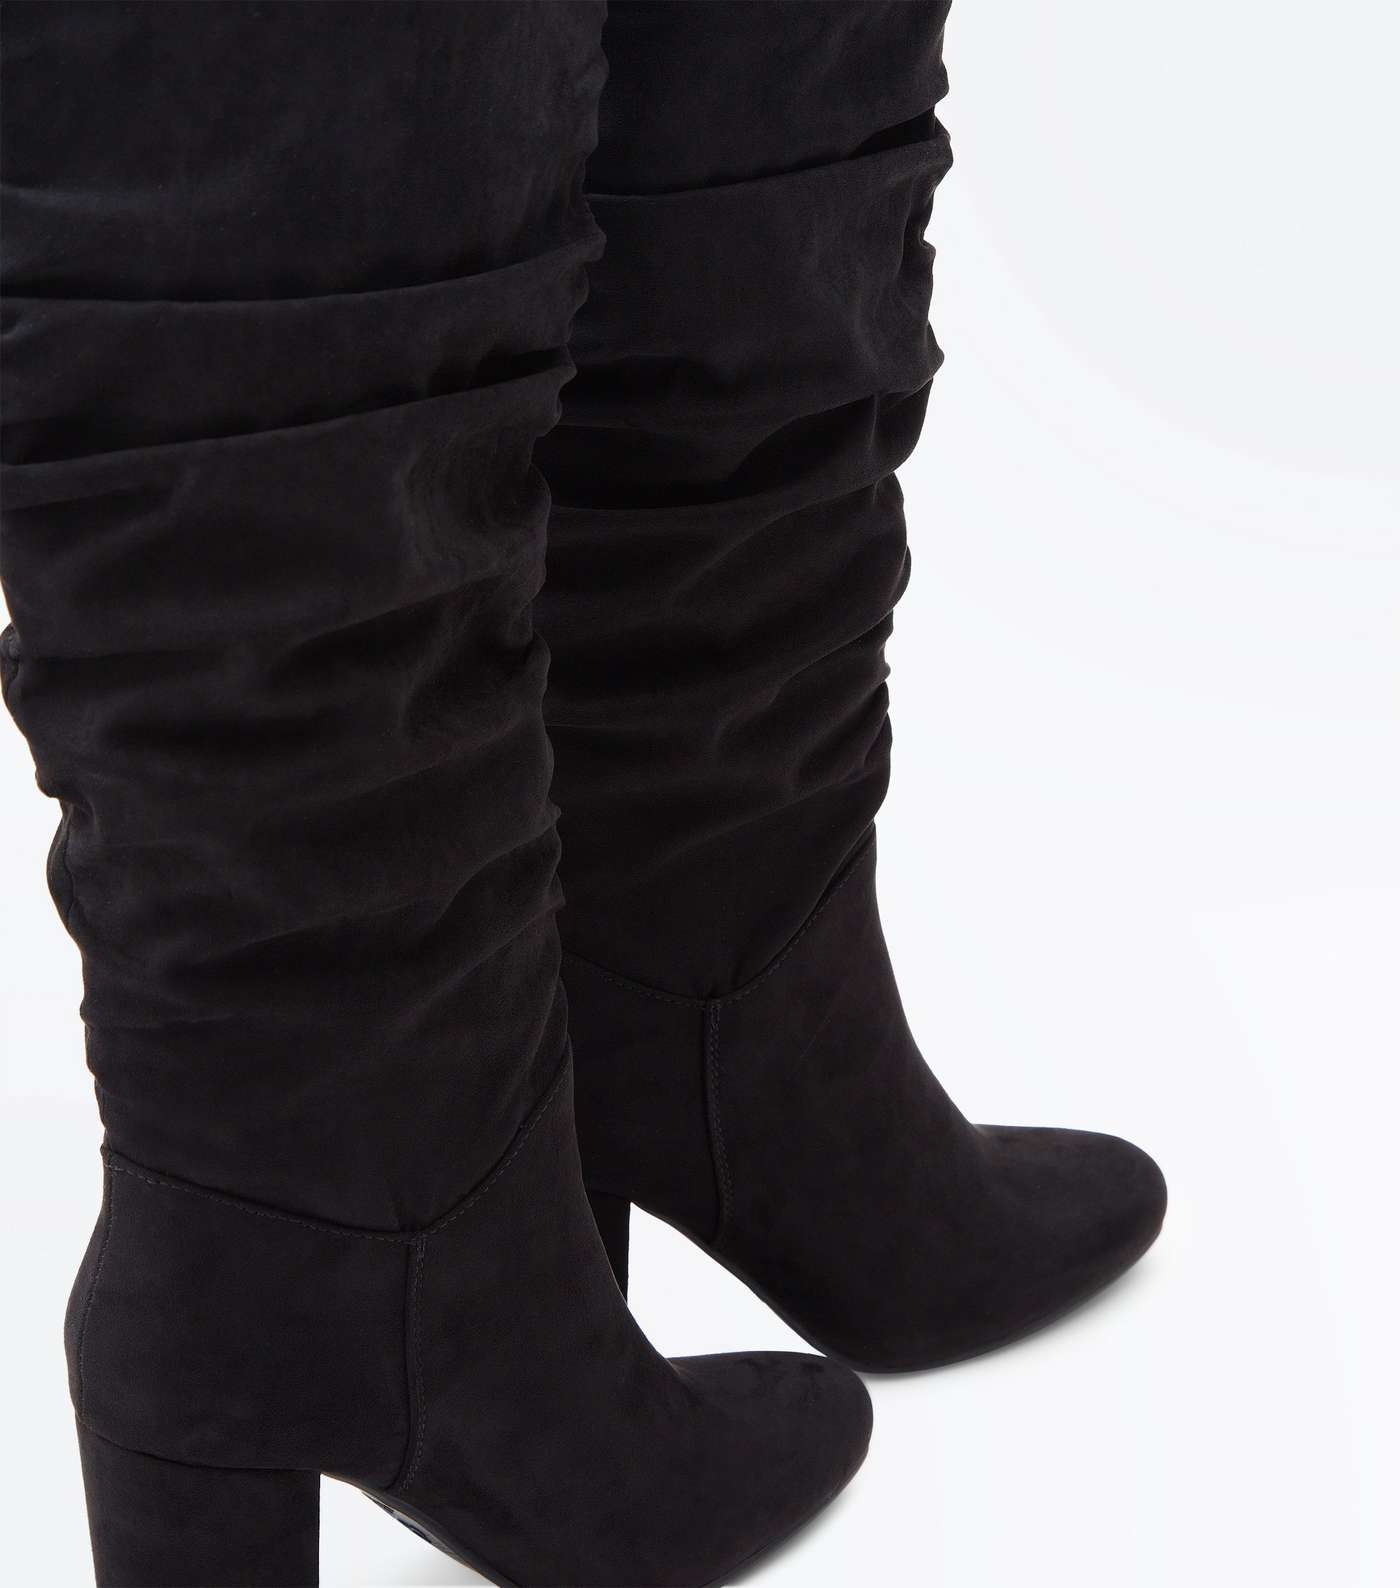 Black Suedette Heeled Slouch Knee High Boots Image 5